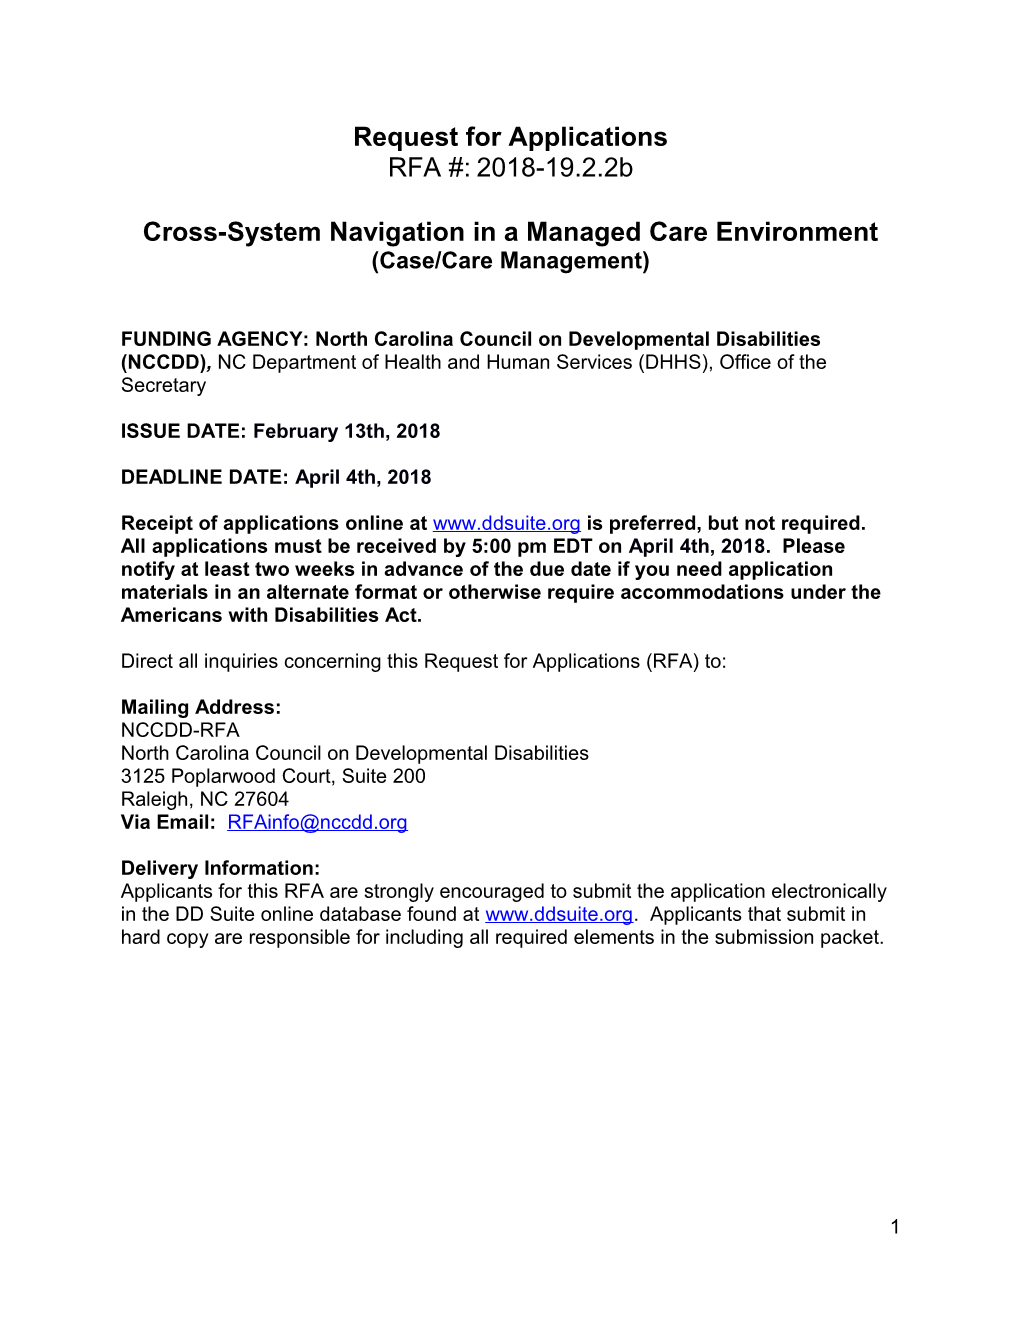 Cross-System Navigation in a Managed Care Environment